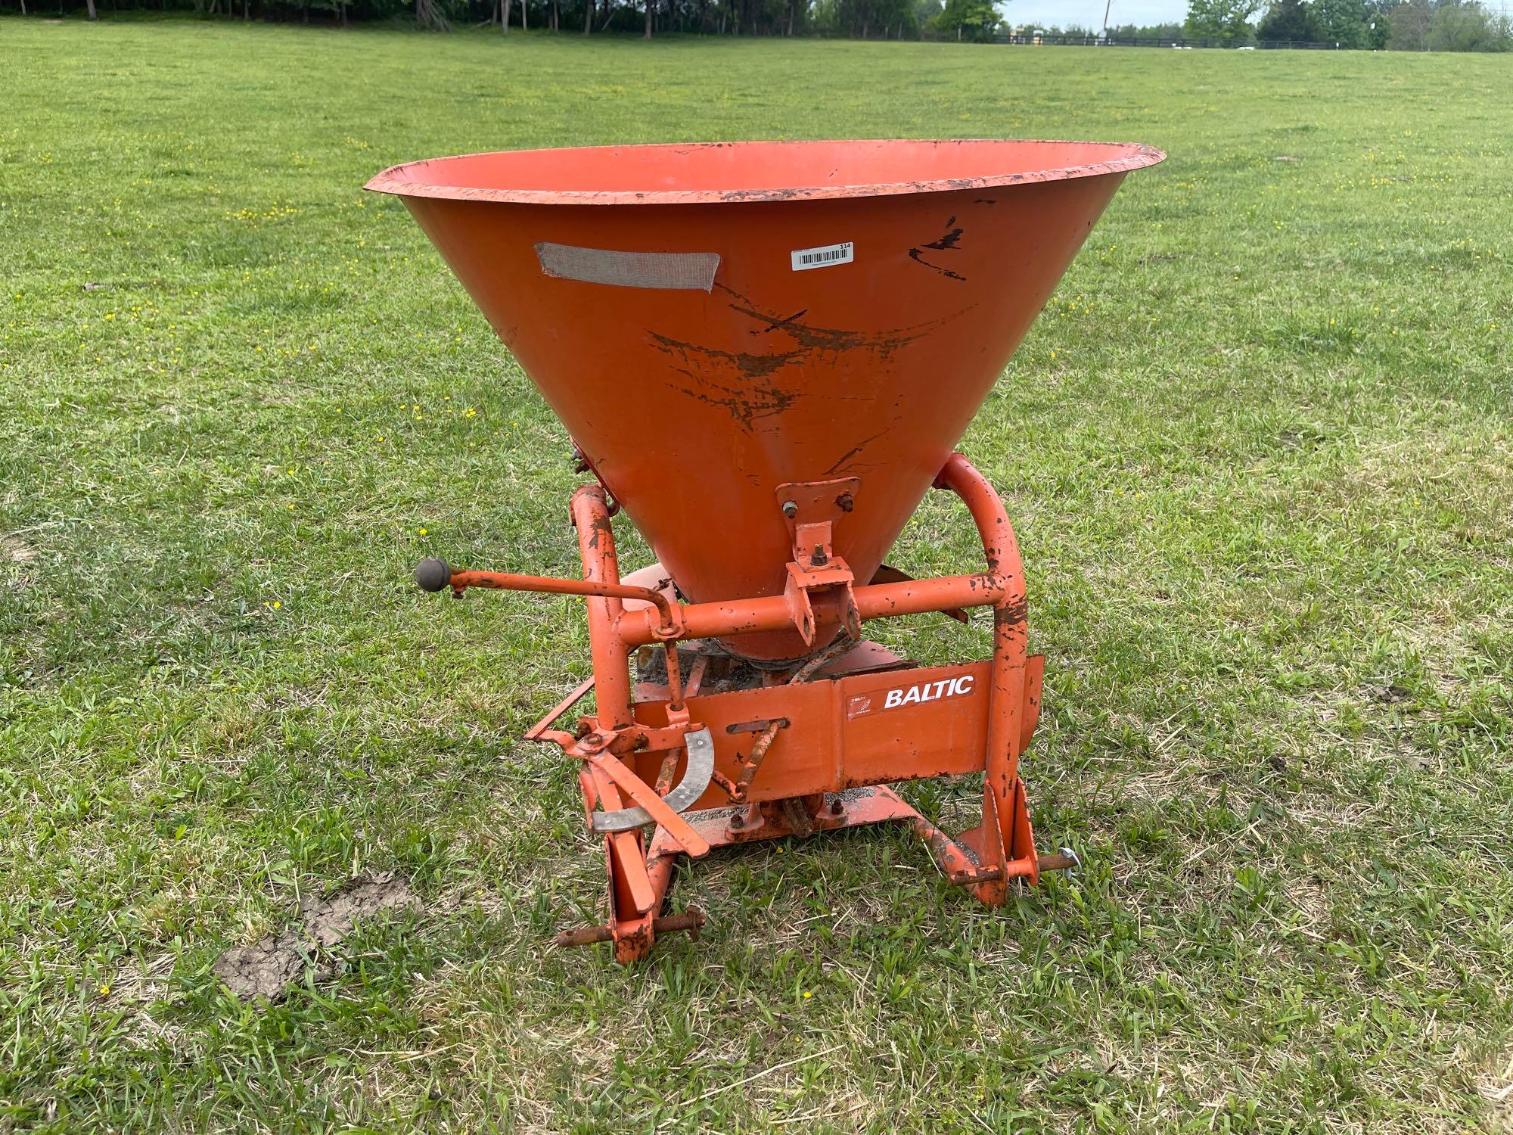 Image for Baltic 3Pt Hitch Spreader- adjustments need work, no PTO